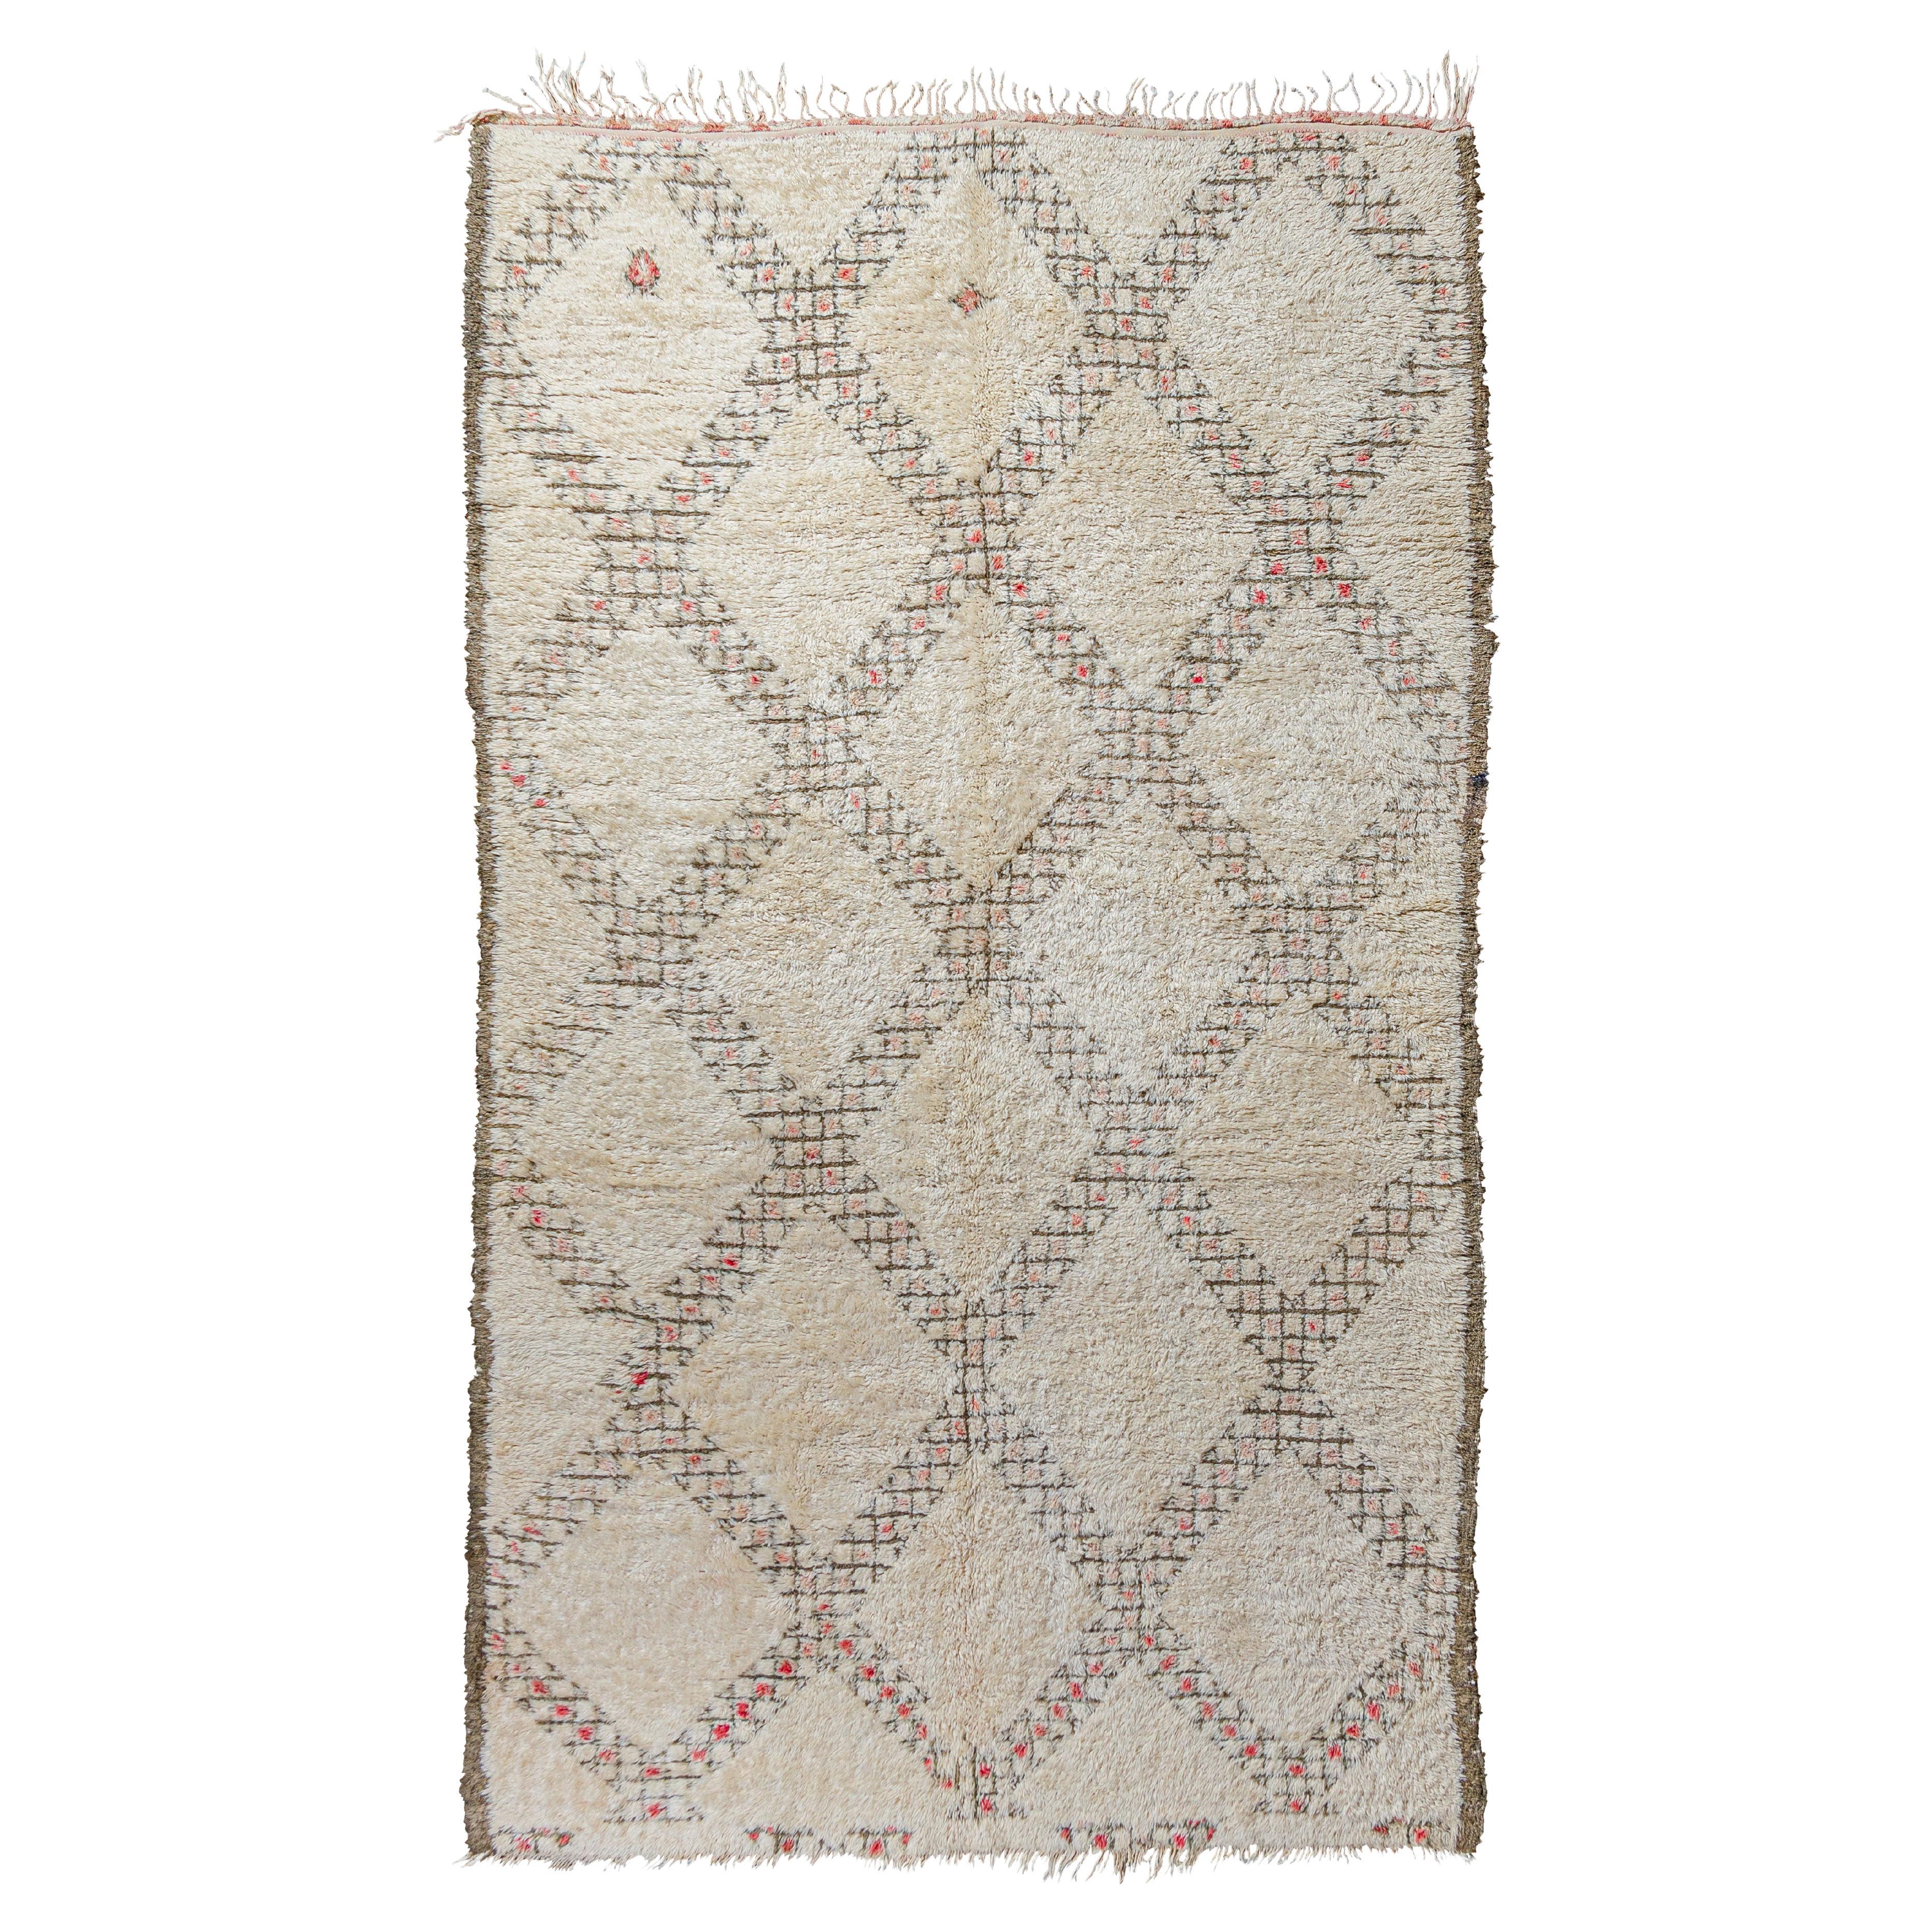 Stunning neutral vintage Moroccan Marmoucha carpet curated by Breuckelen Berber